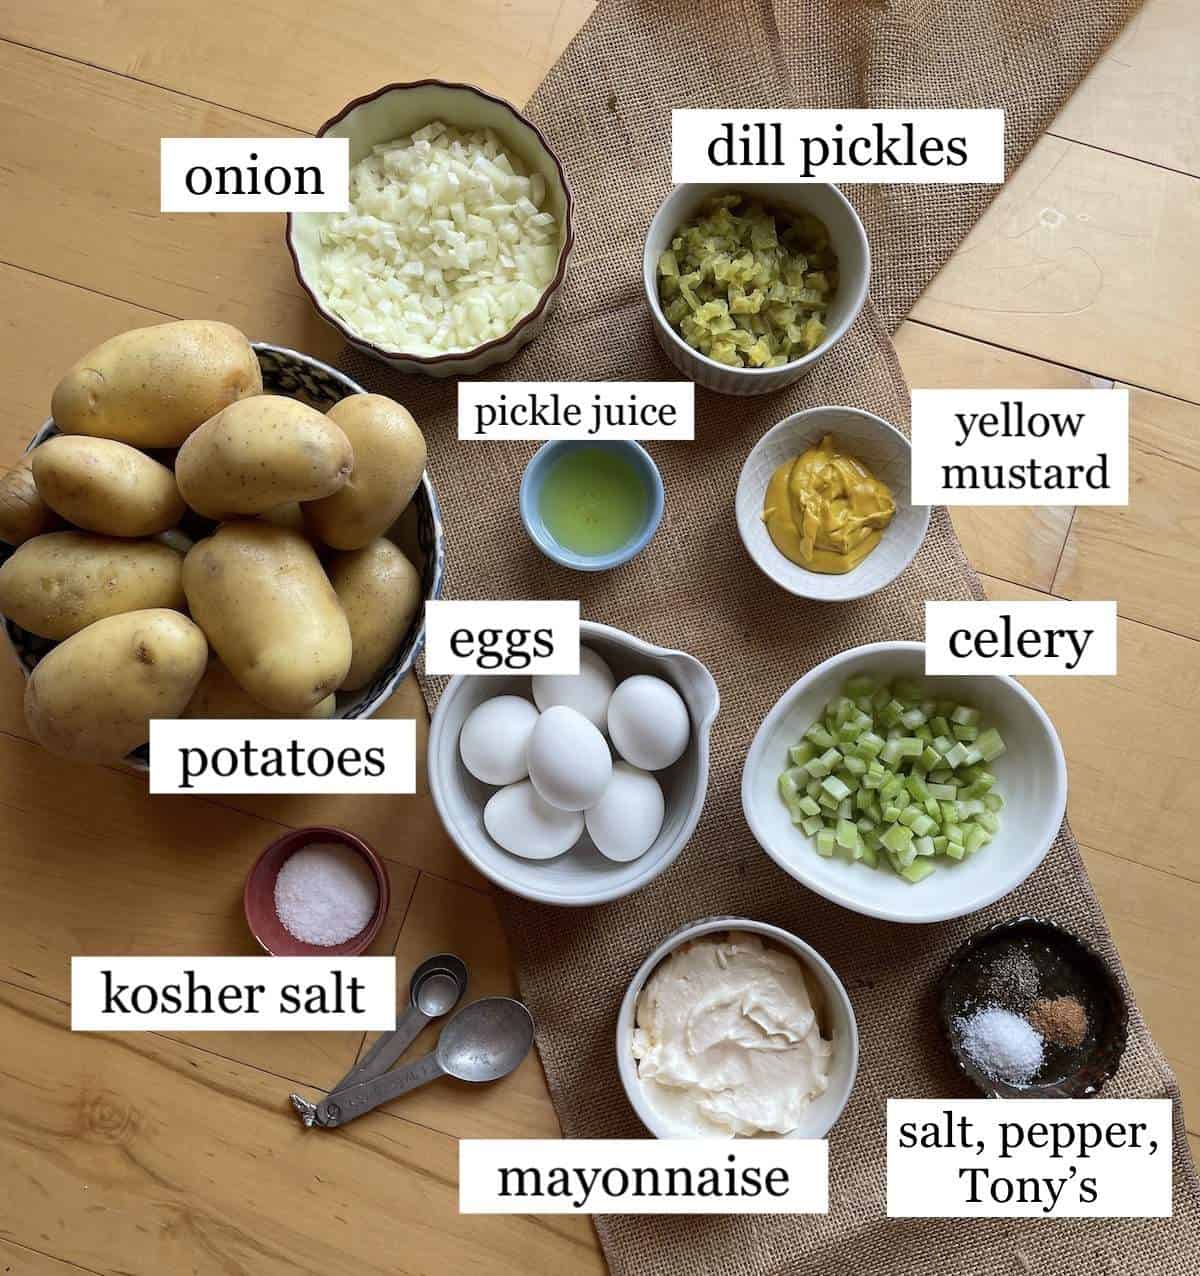 The ingredients in southern potato salad, laid out and labeled.